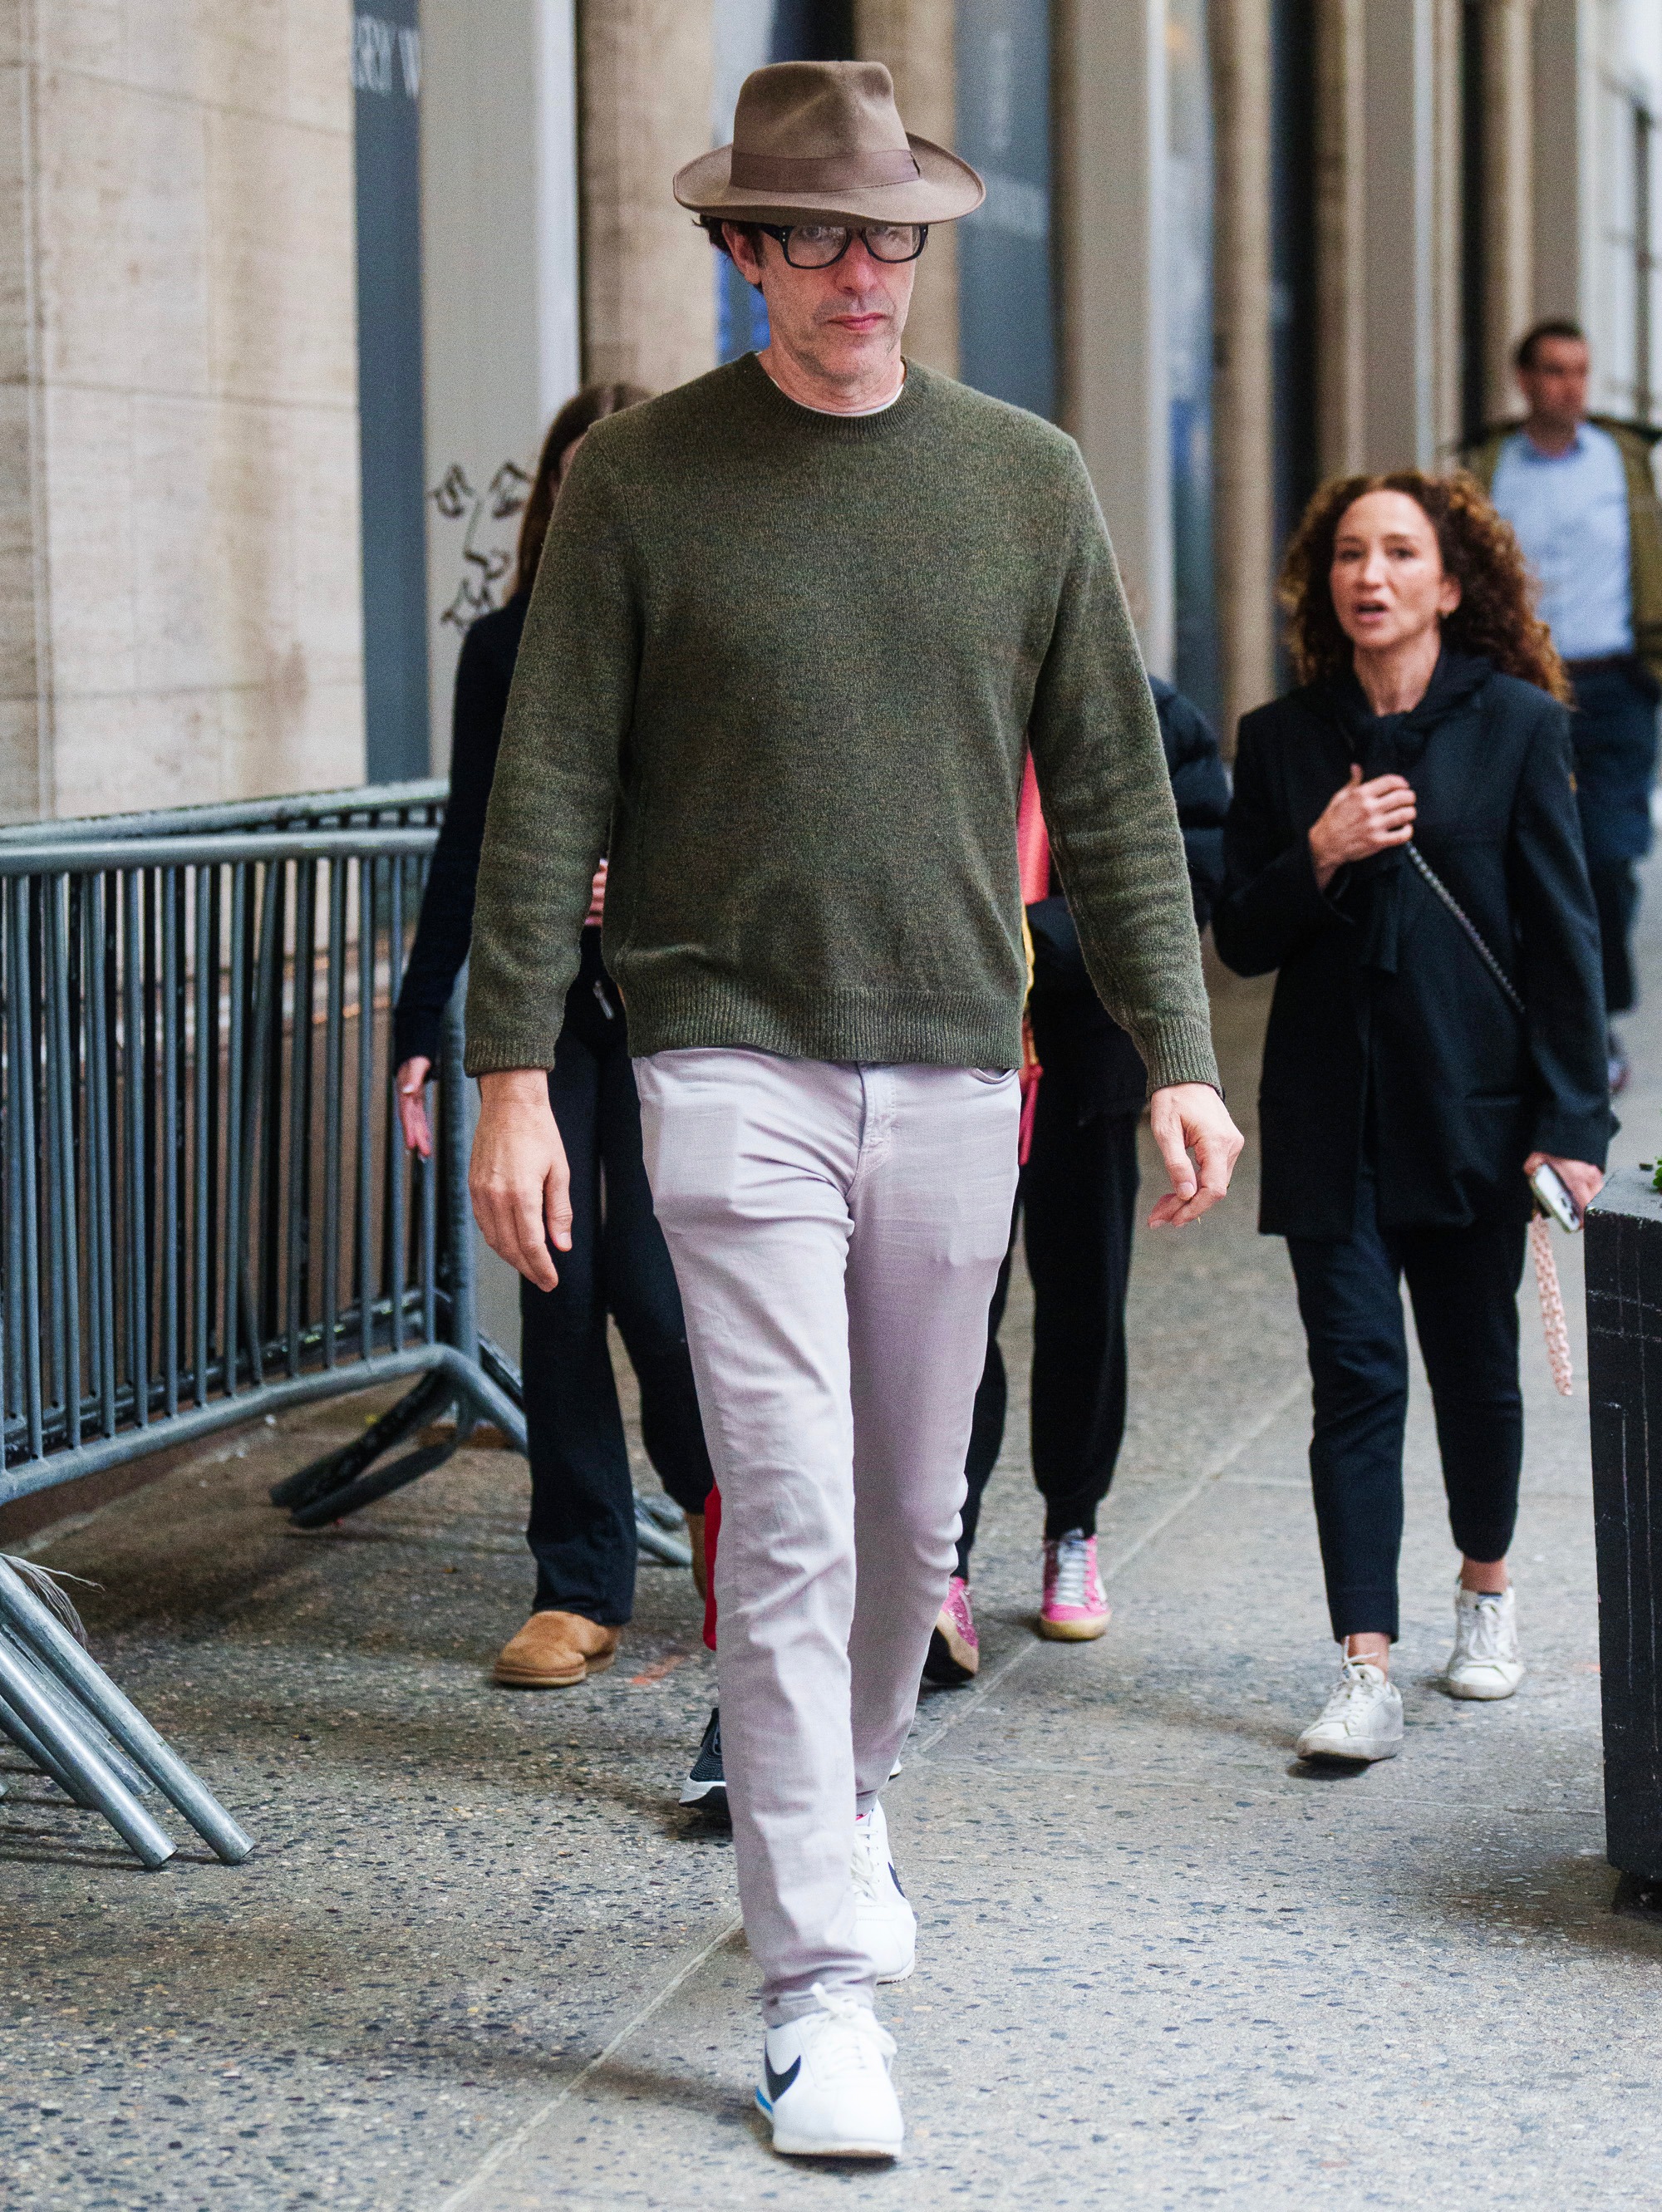 The actor, 52, stepped out on Fifth Avenue in New York City yesterday